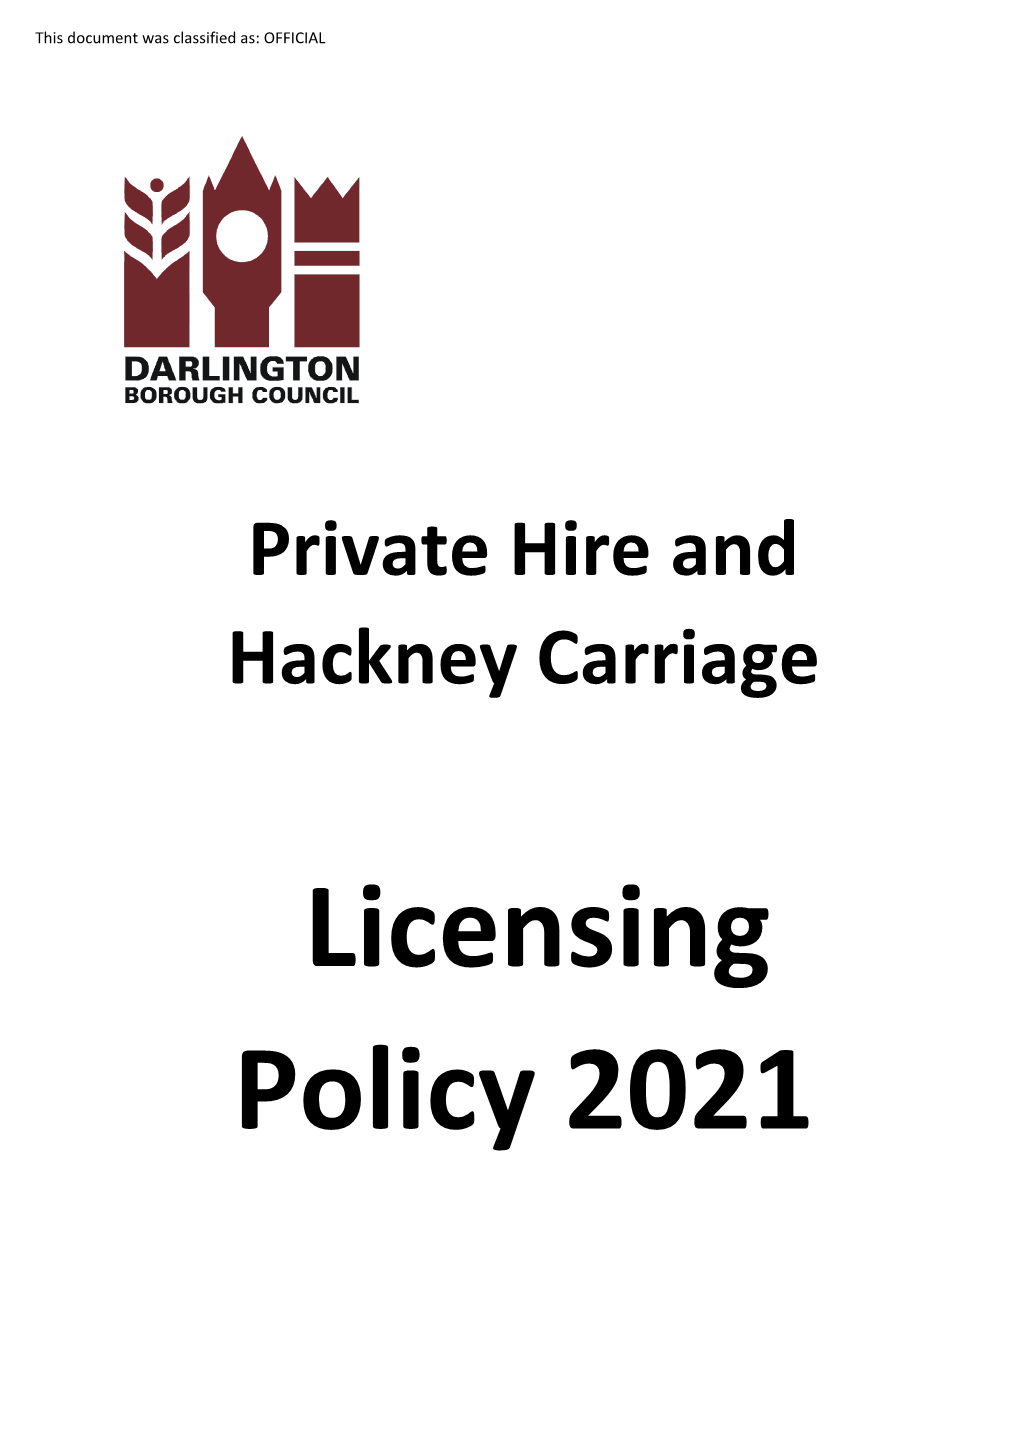 DBC Private Hire Hackney Carriage Licensing Policy 2021